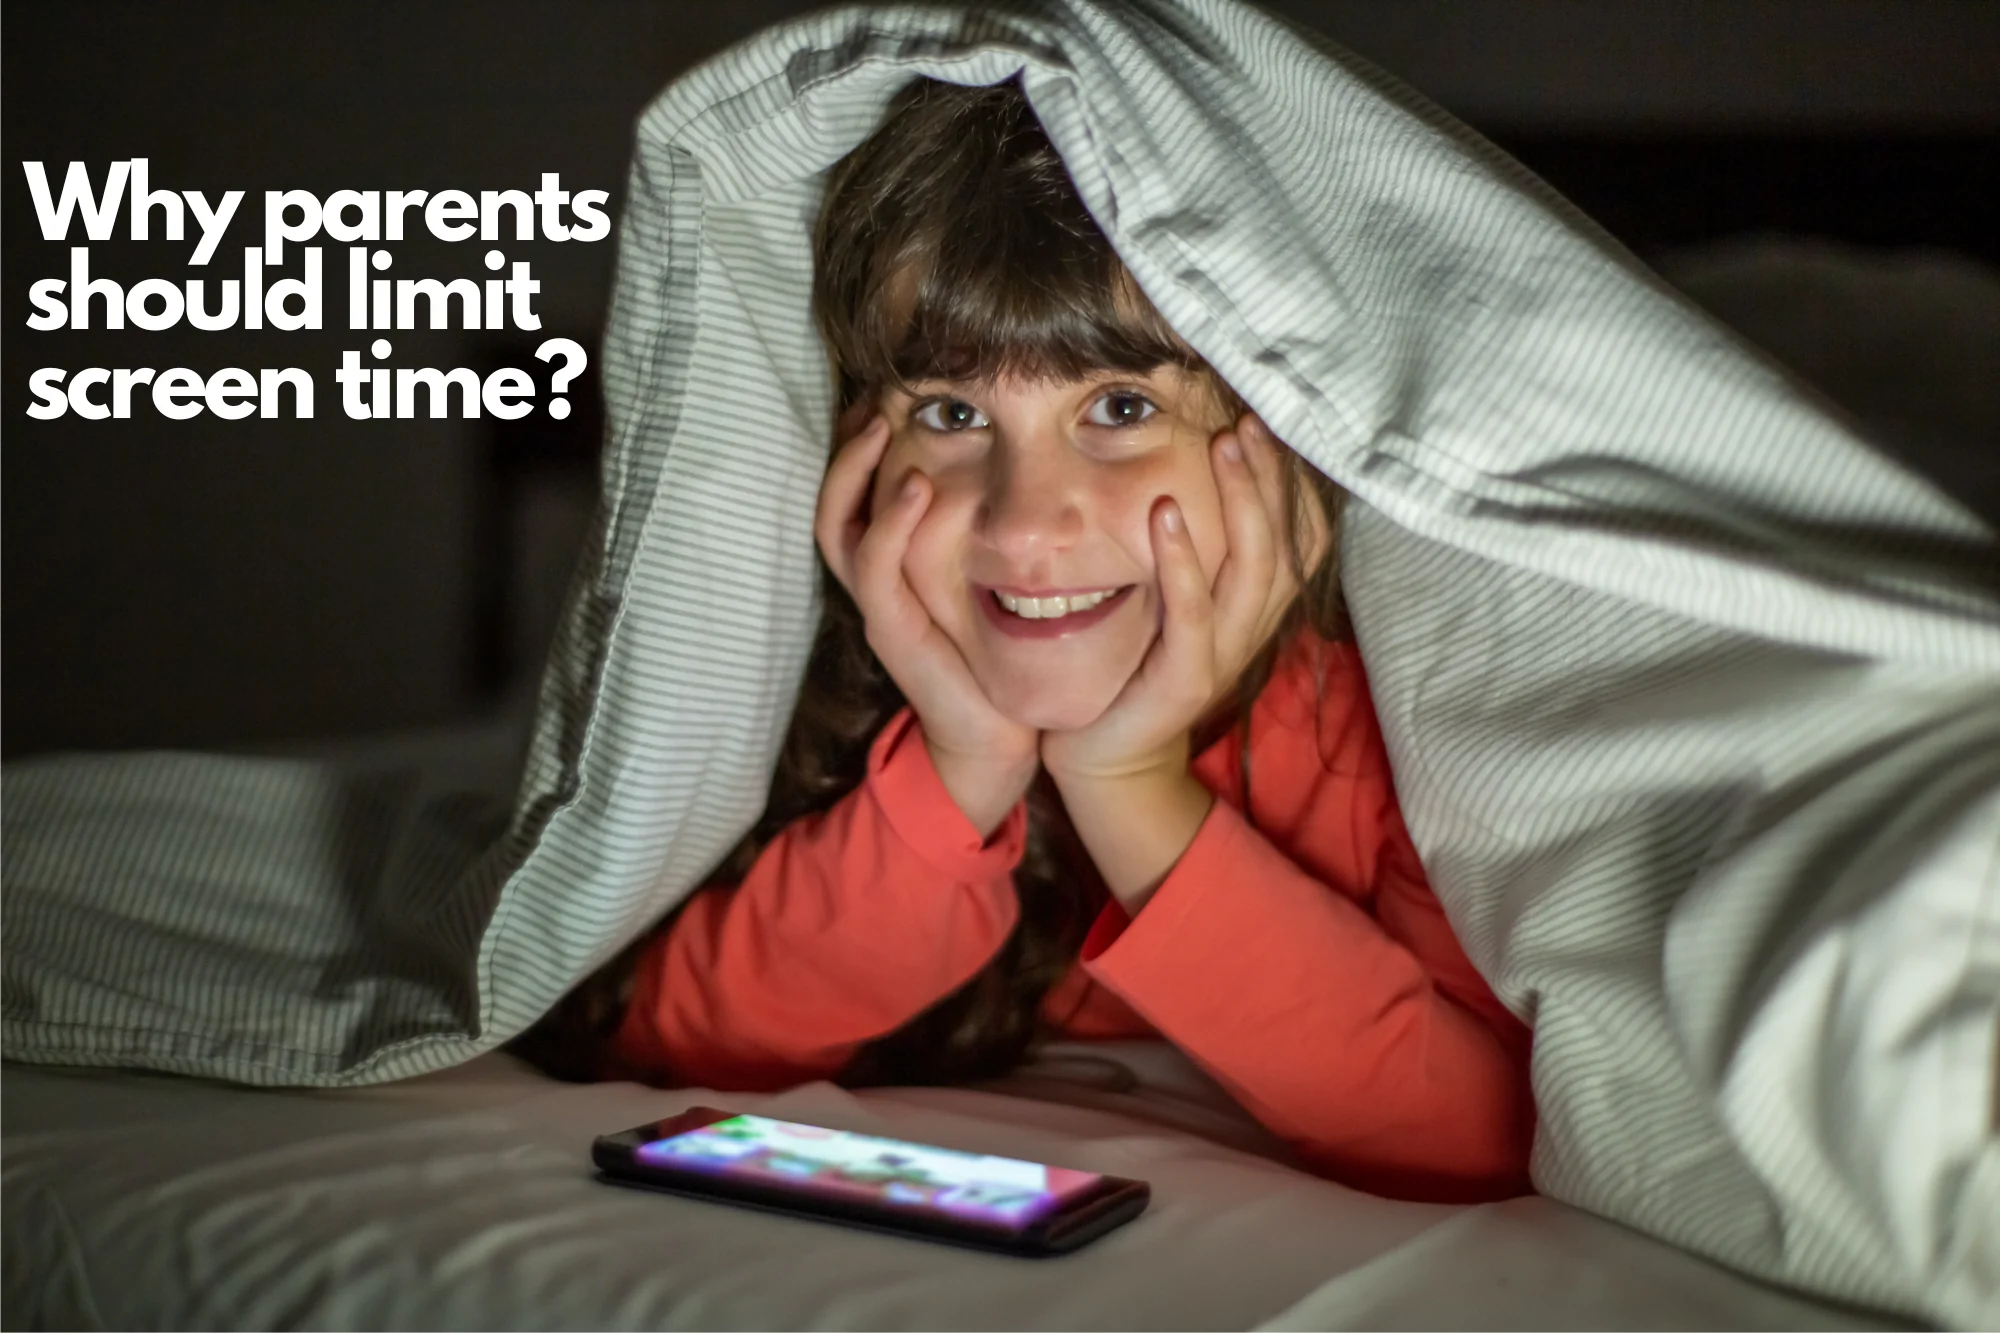 Why parents should limit screen time?